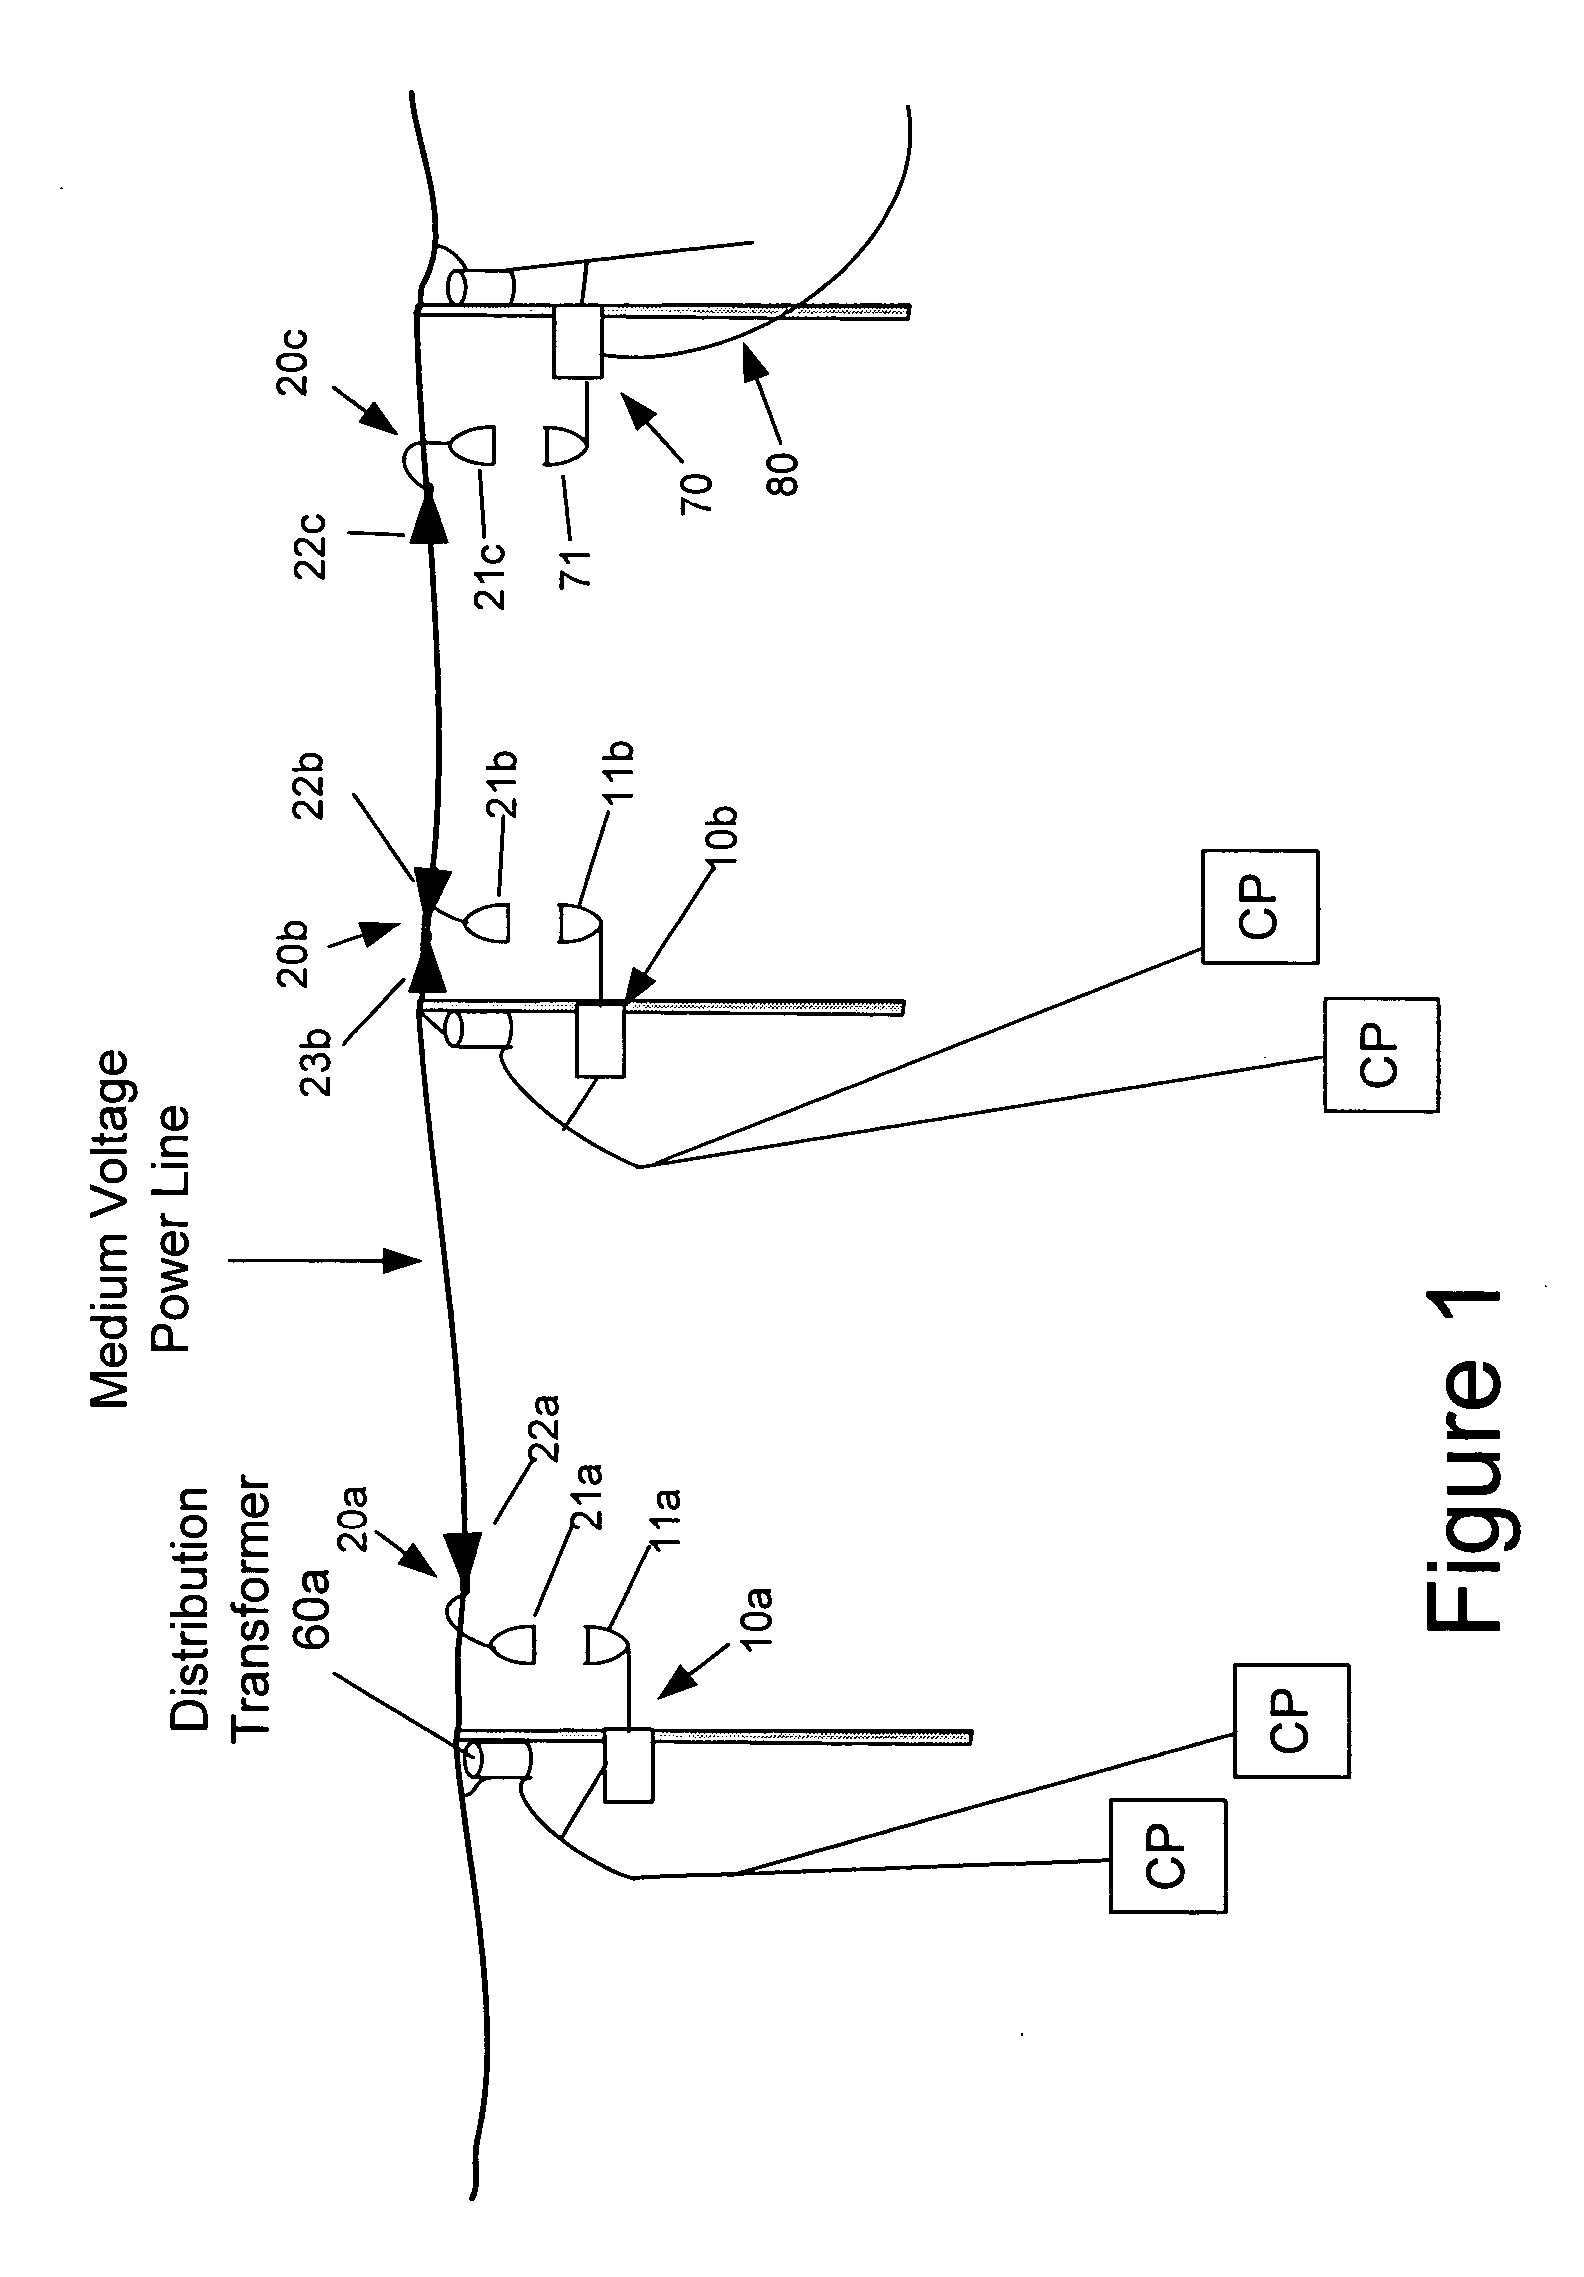 Surface wave power line communications system and method